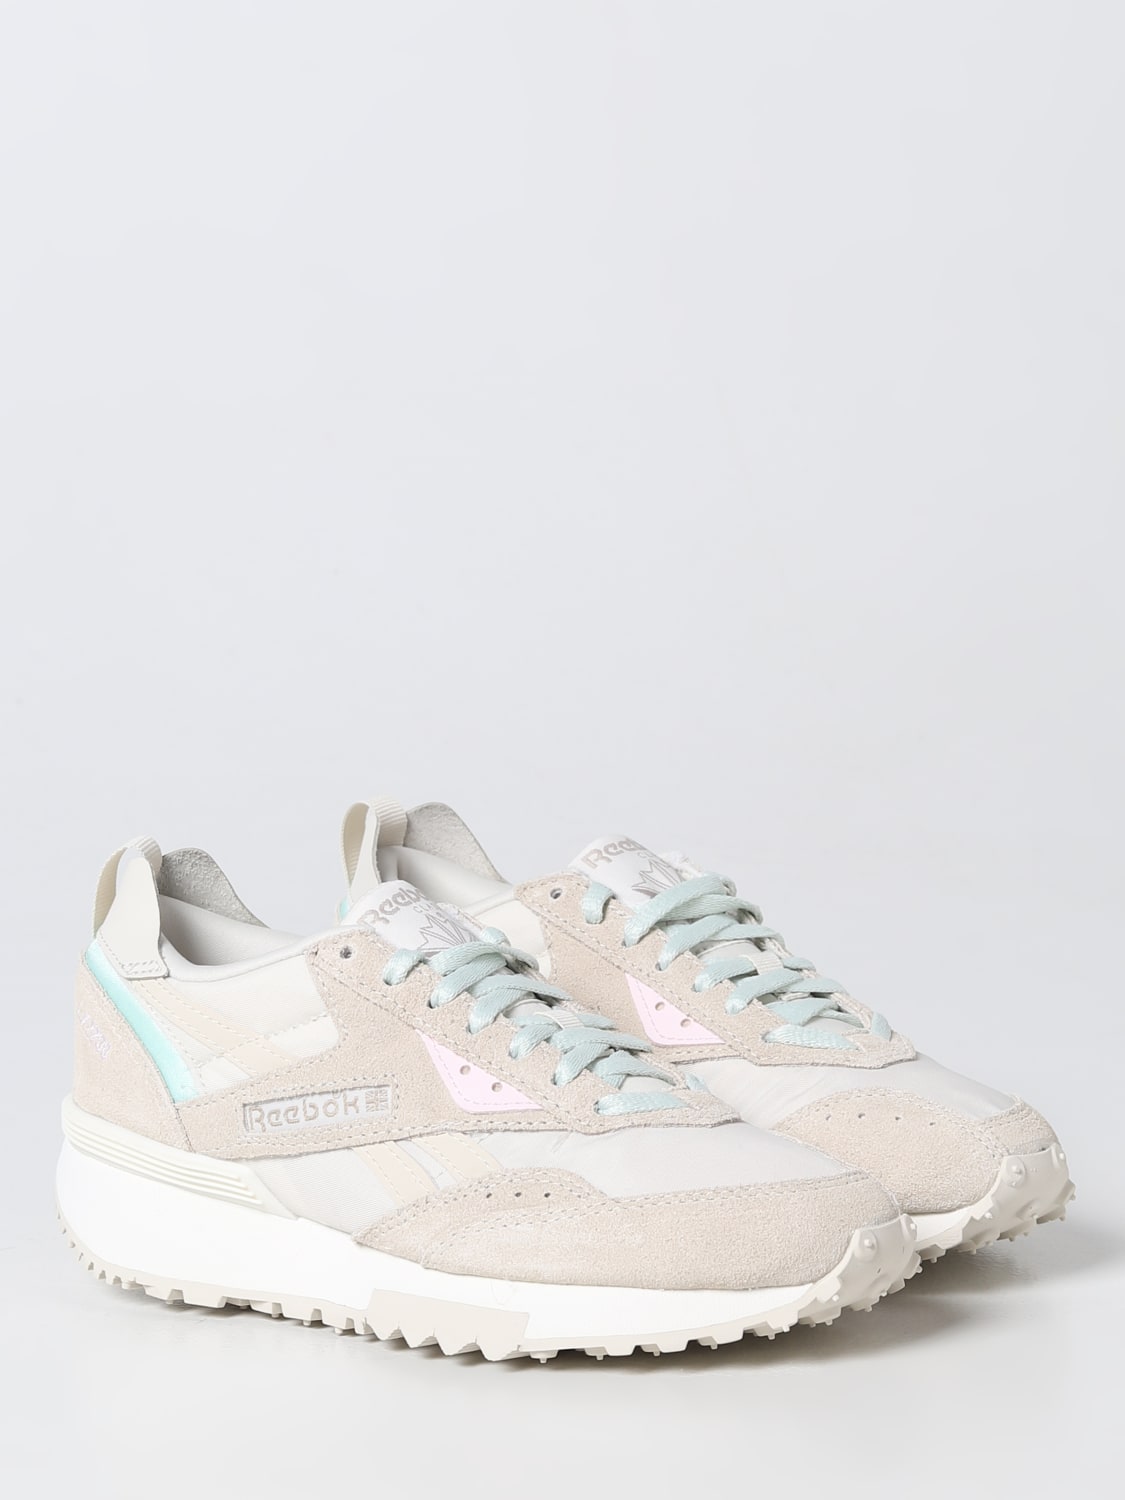 sneakers for woman - Beige | Reebok sneakers online at GIGLIO.COM